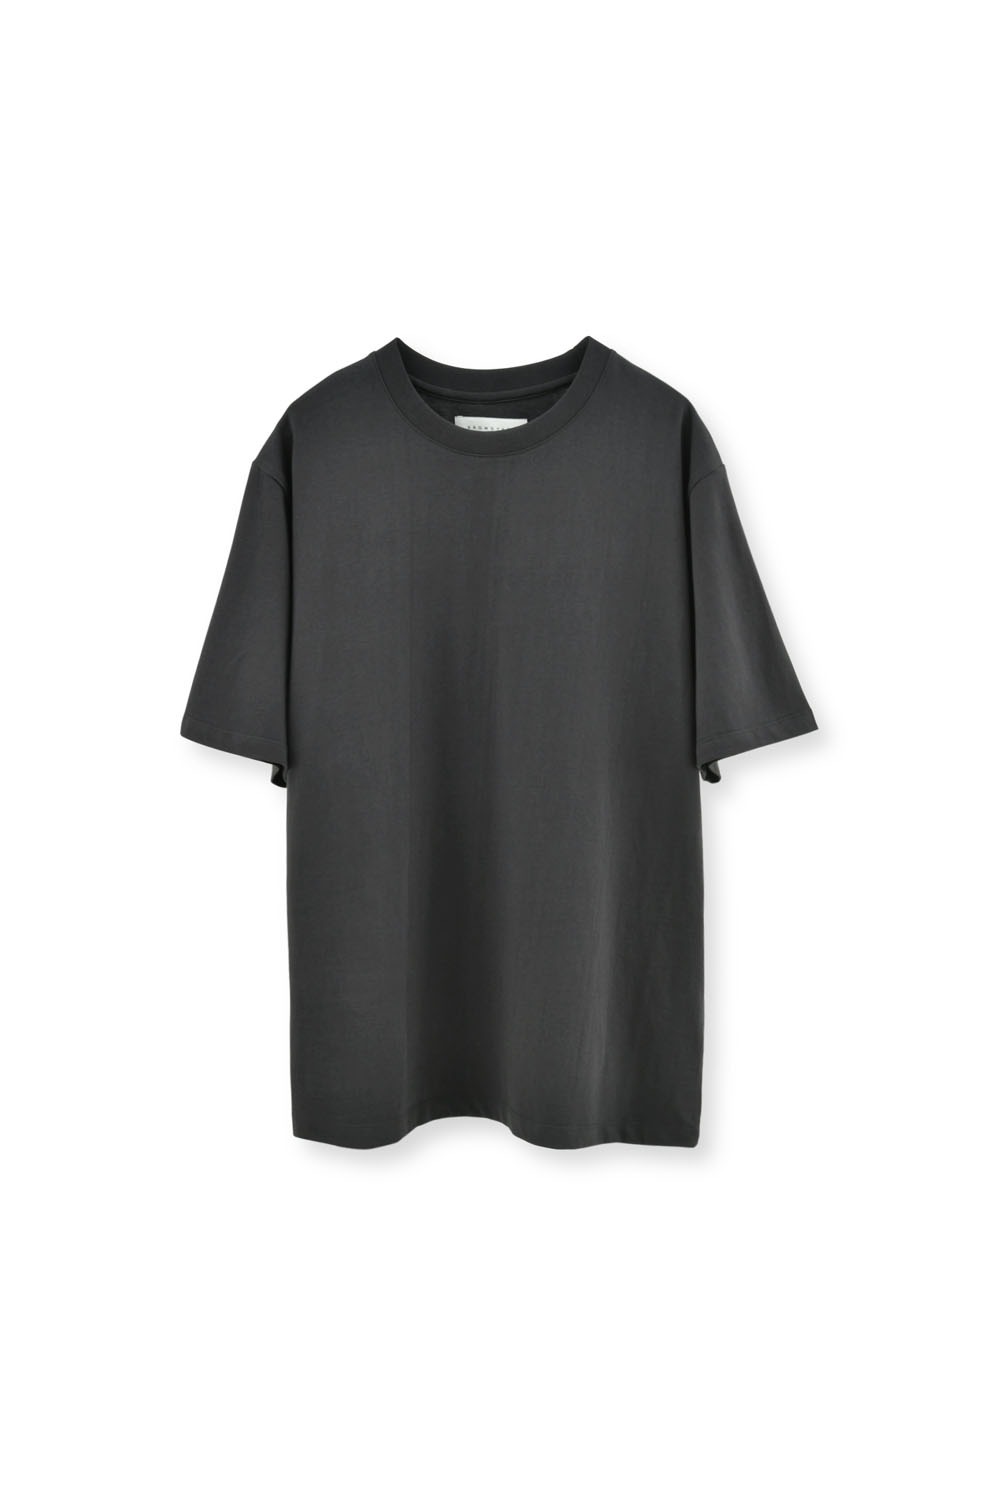 Essential T-Shirt-Charcoal